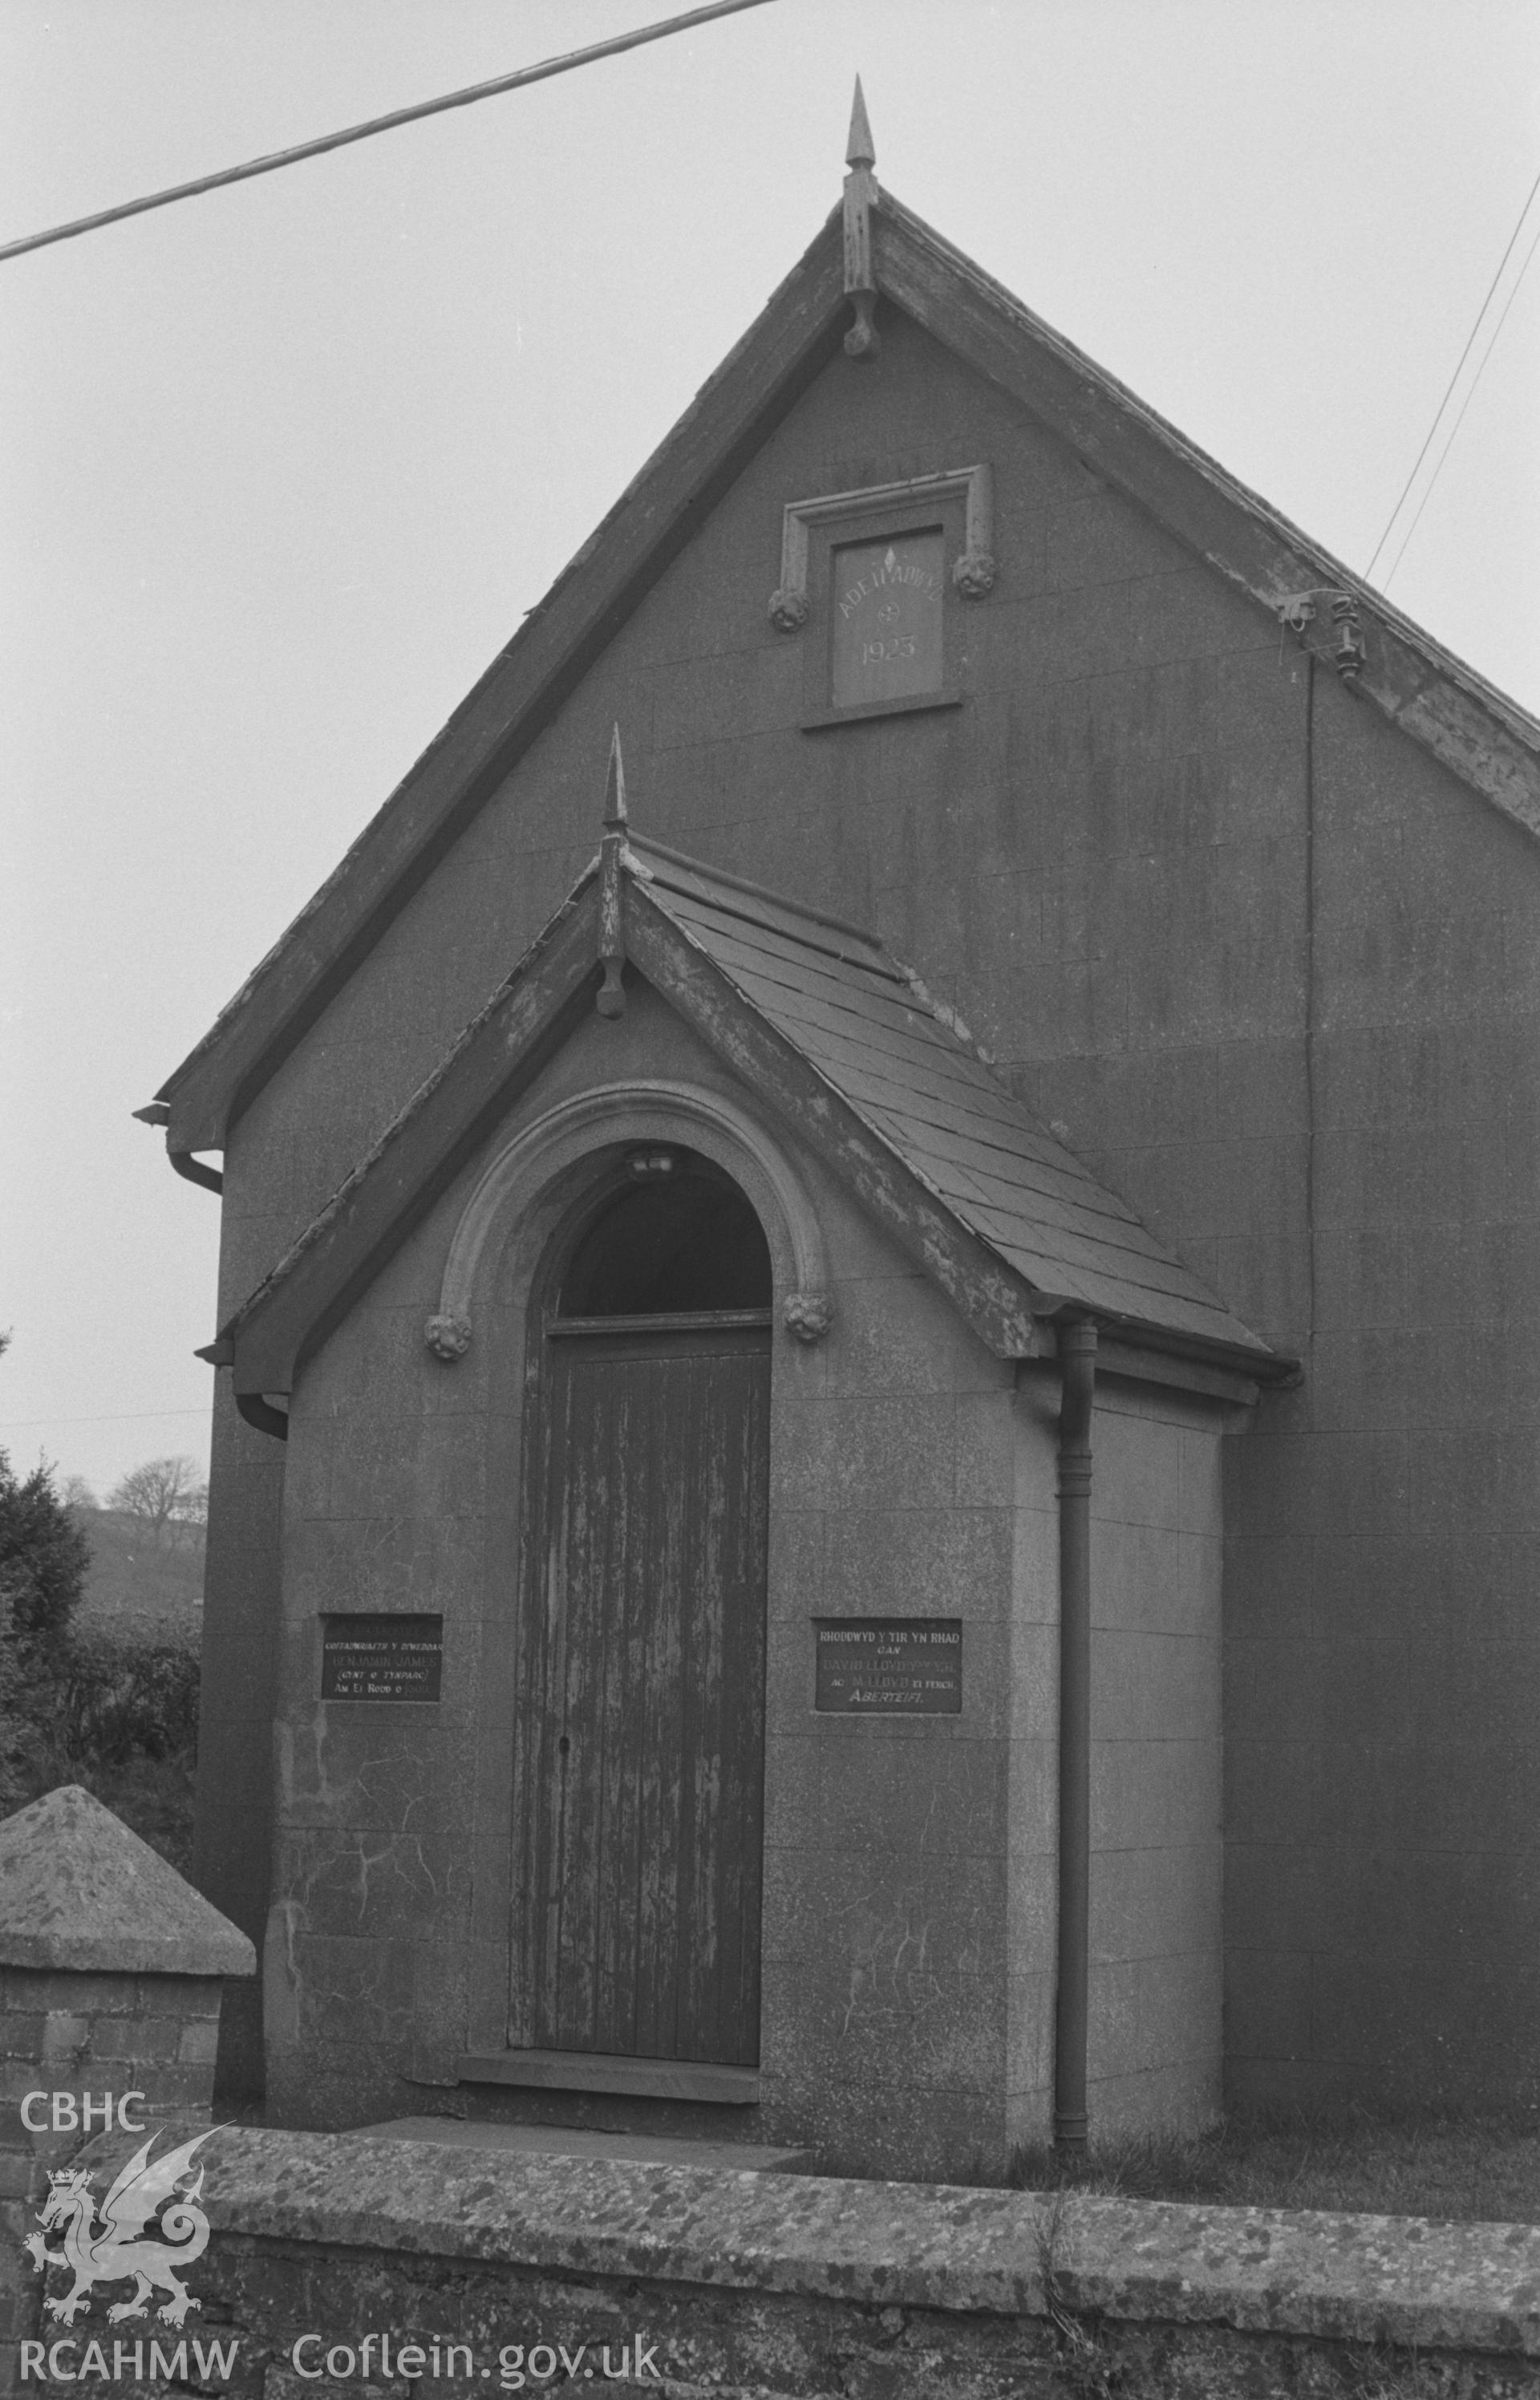 Digital copy of a black and white negative showing Fronwen Welsh Calvinistic Methodist Chapel Vestry, Llanarth. Photographed by Arthur O. Chater on 13th April 1967 looking north from Grid Reference SN 425 577.